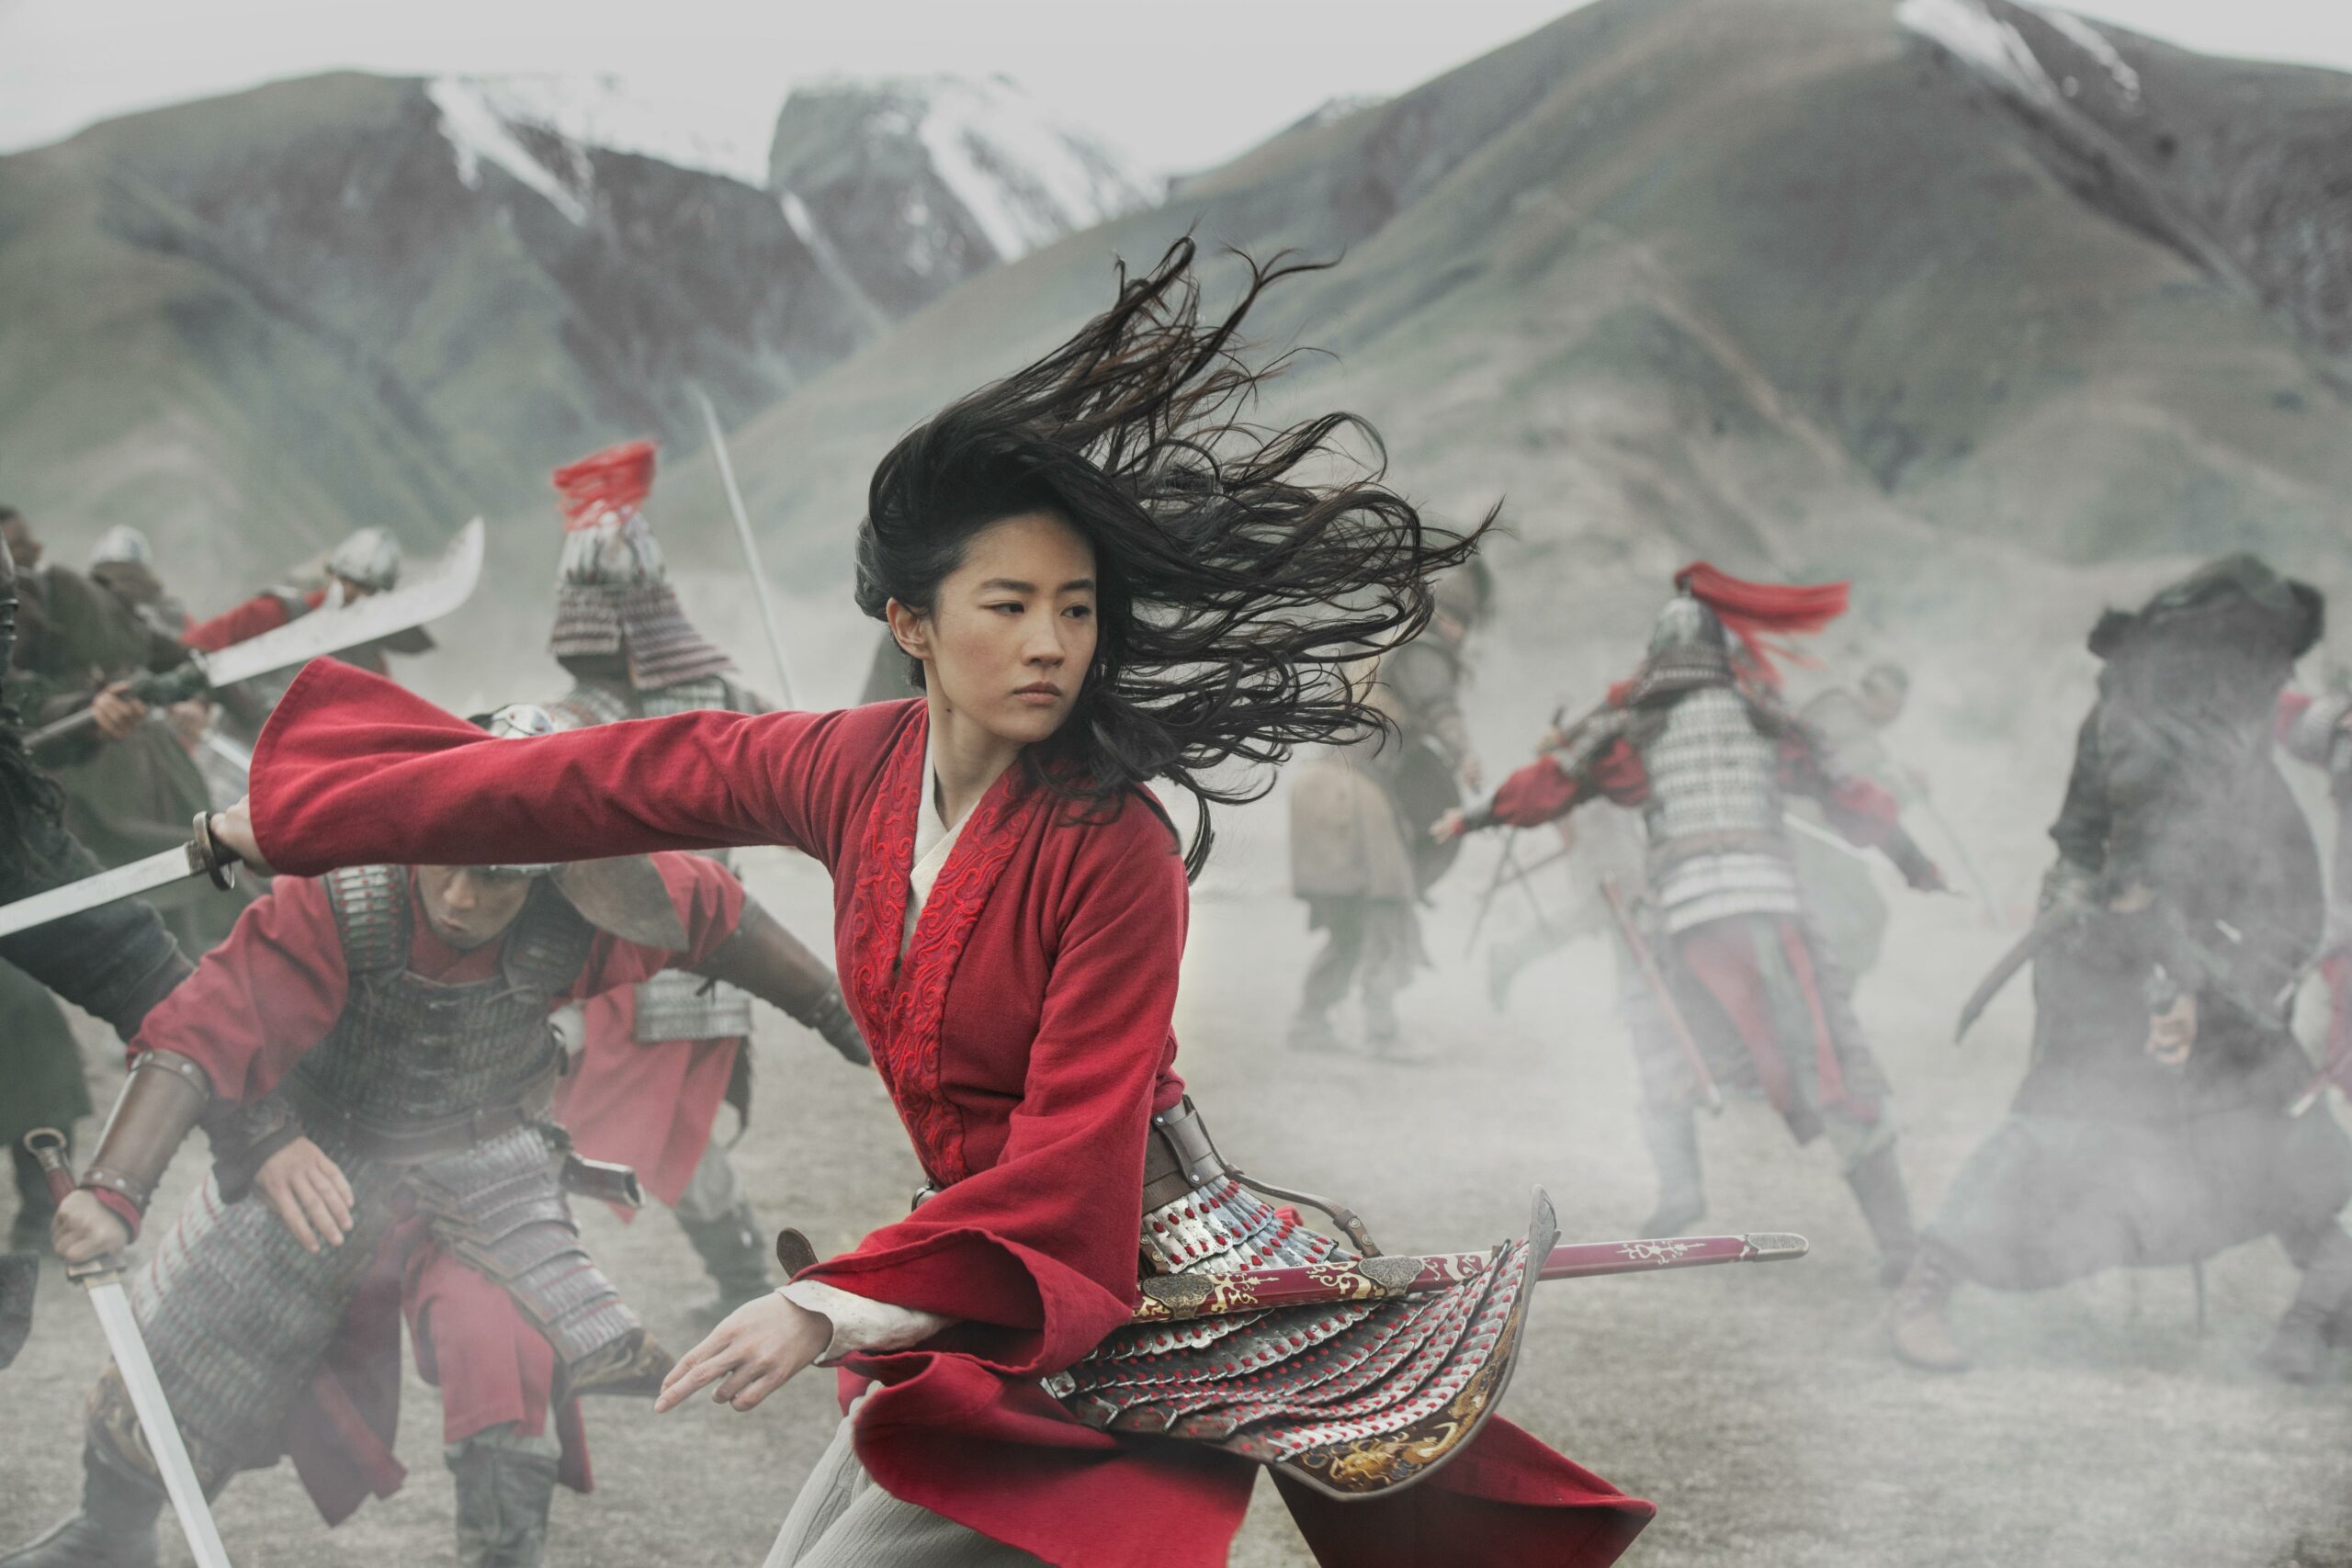 Mulan, a young maiden, in combat -- with her hair open and flowing in the wind to signify her power and ability